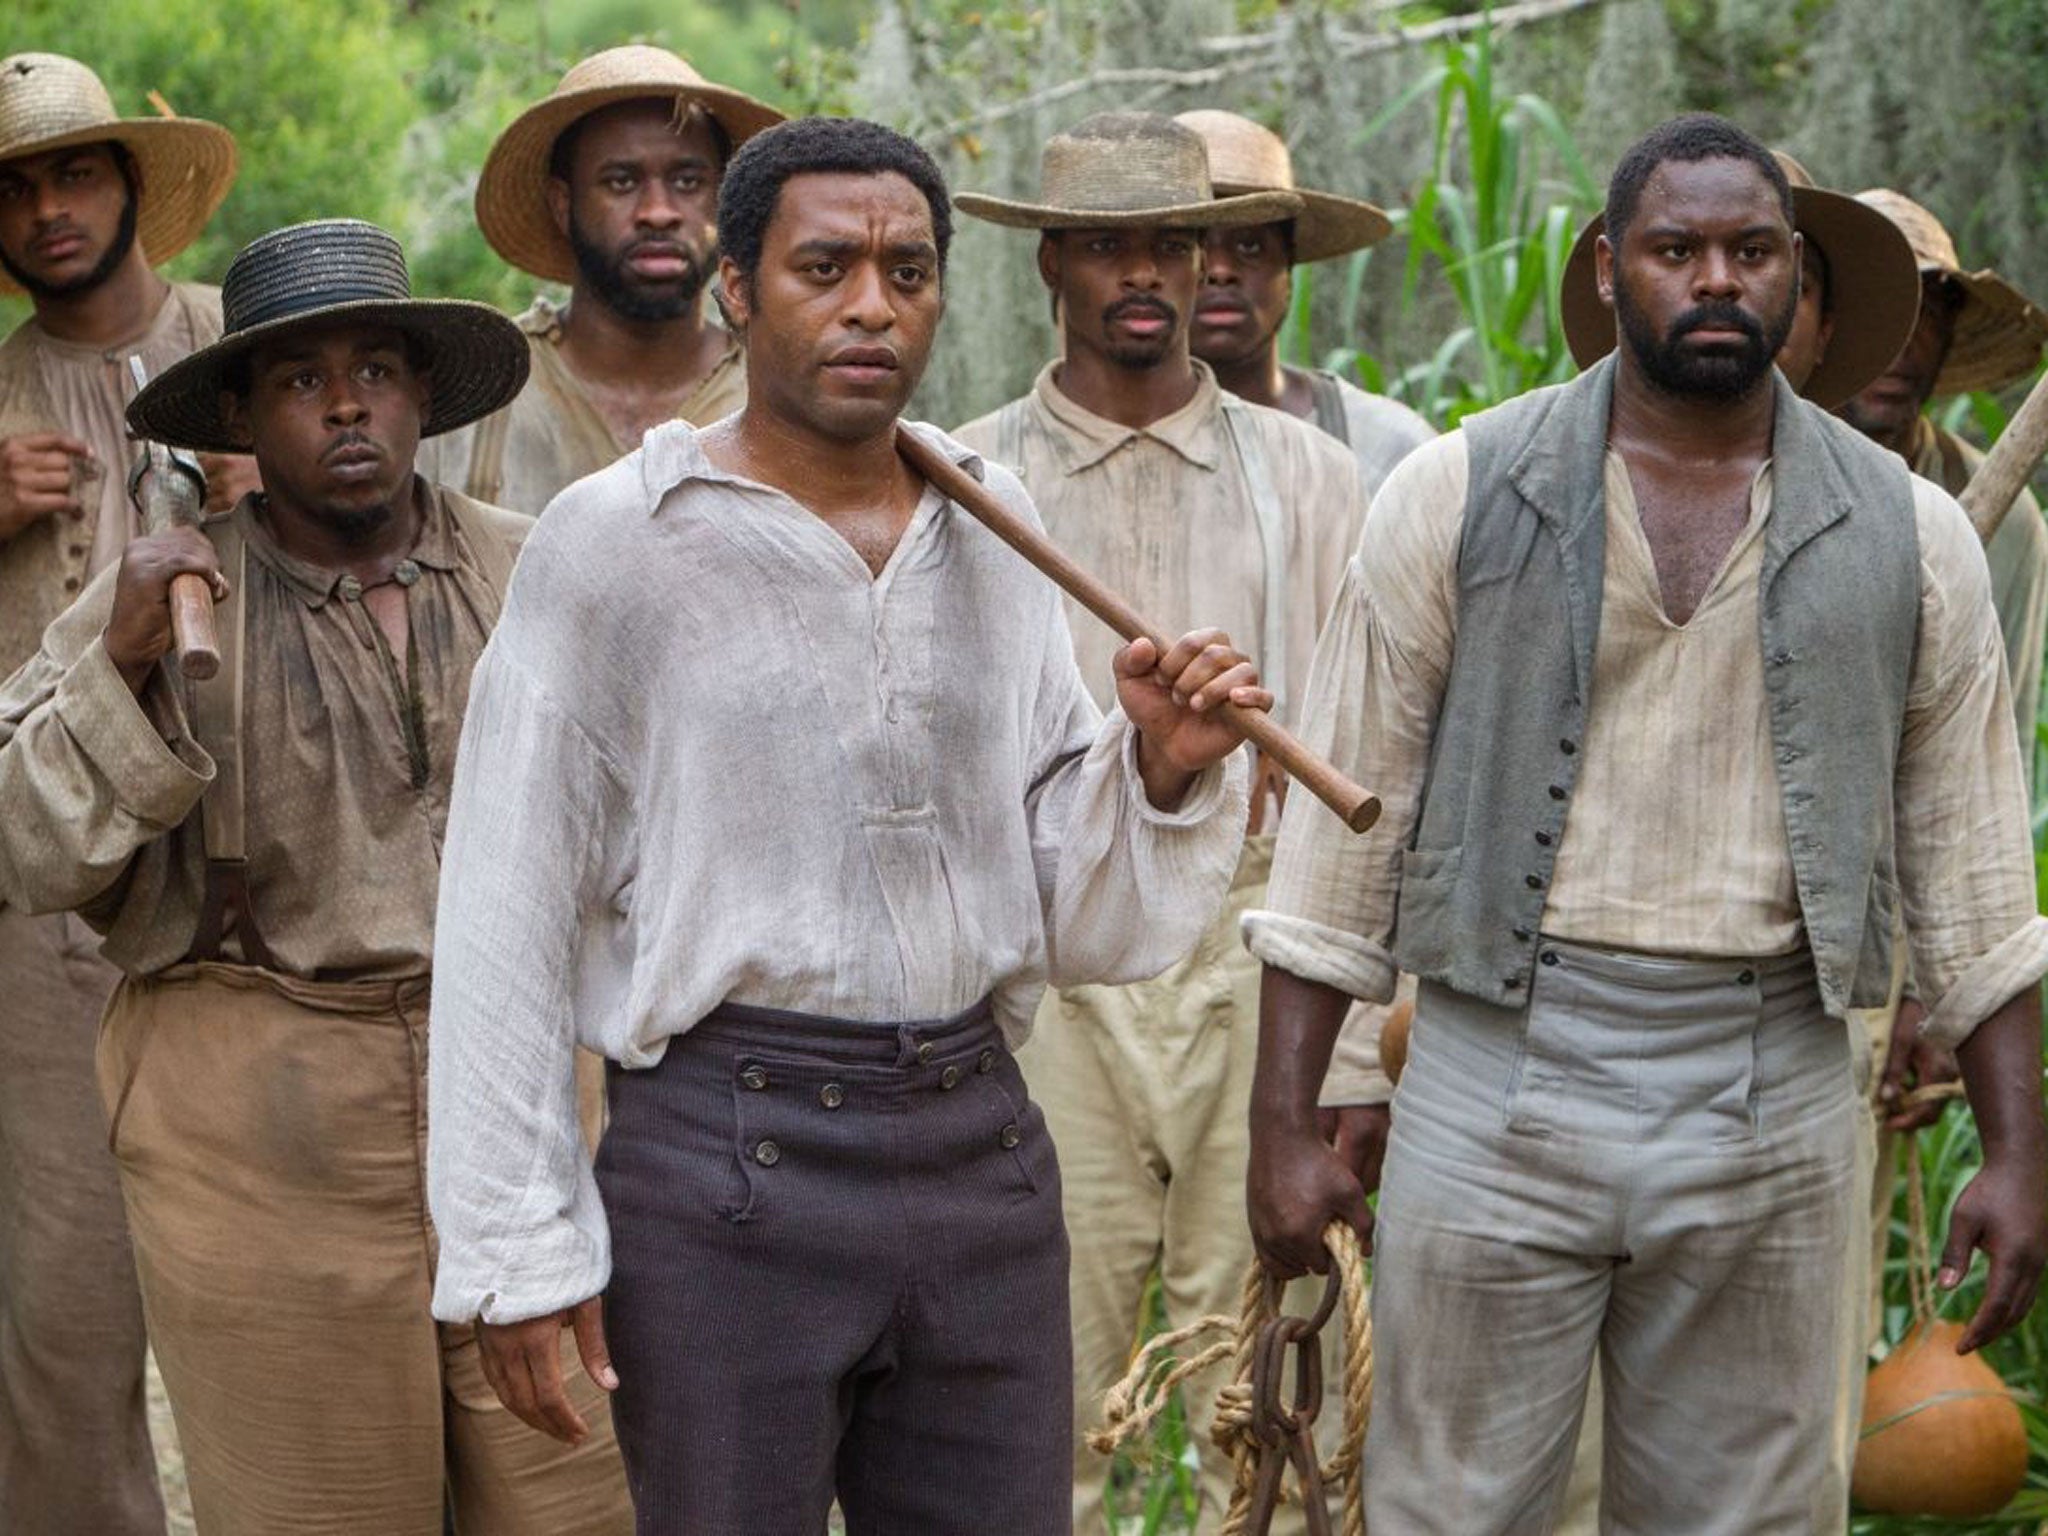 Critic was apparently expecting musical numbers from 12 Years a Slave